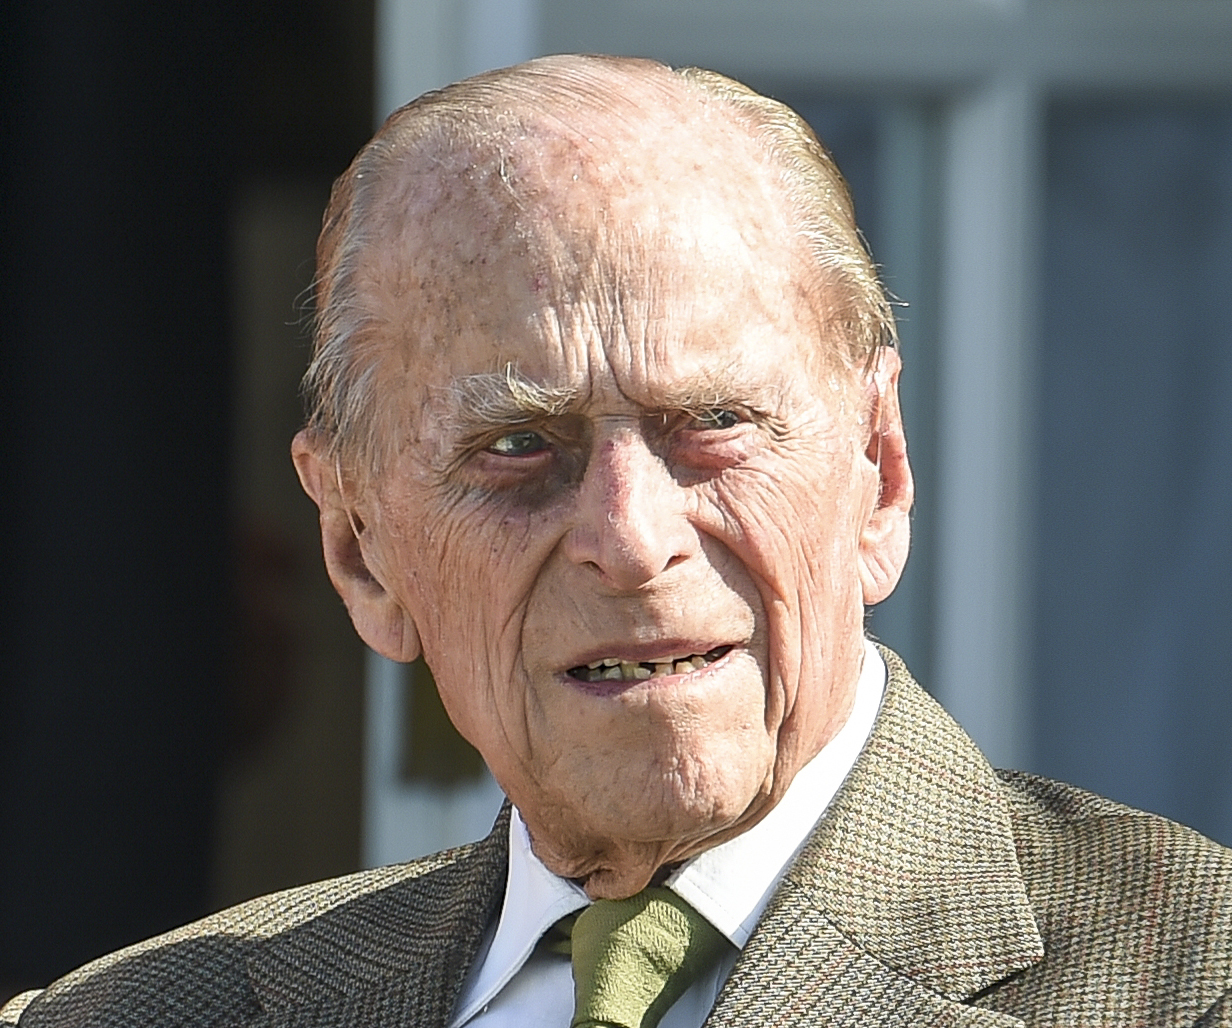 BREAKING: Prince Philip “very shocked and shaken” after nasty car crash